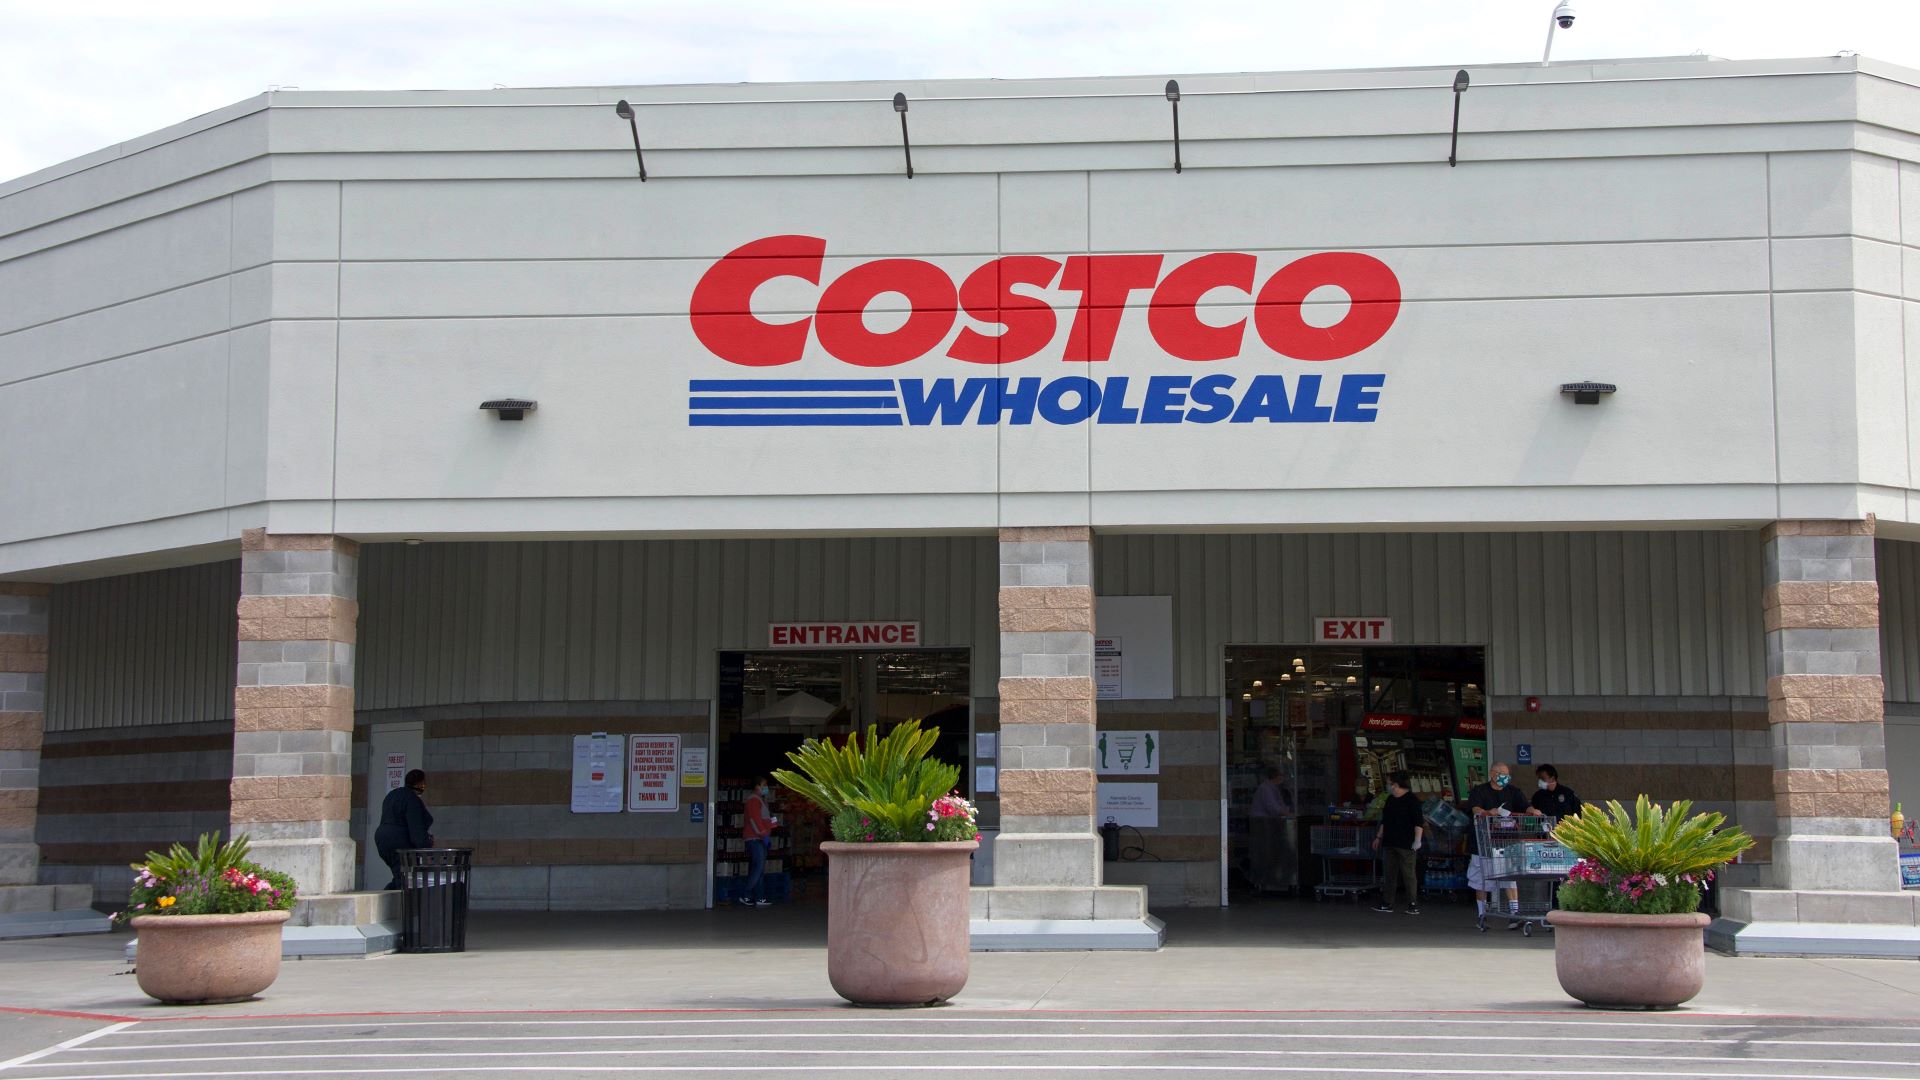 Front entrance to Costco Wholesale store.